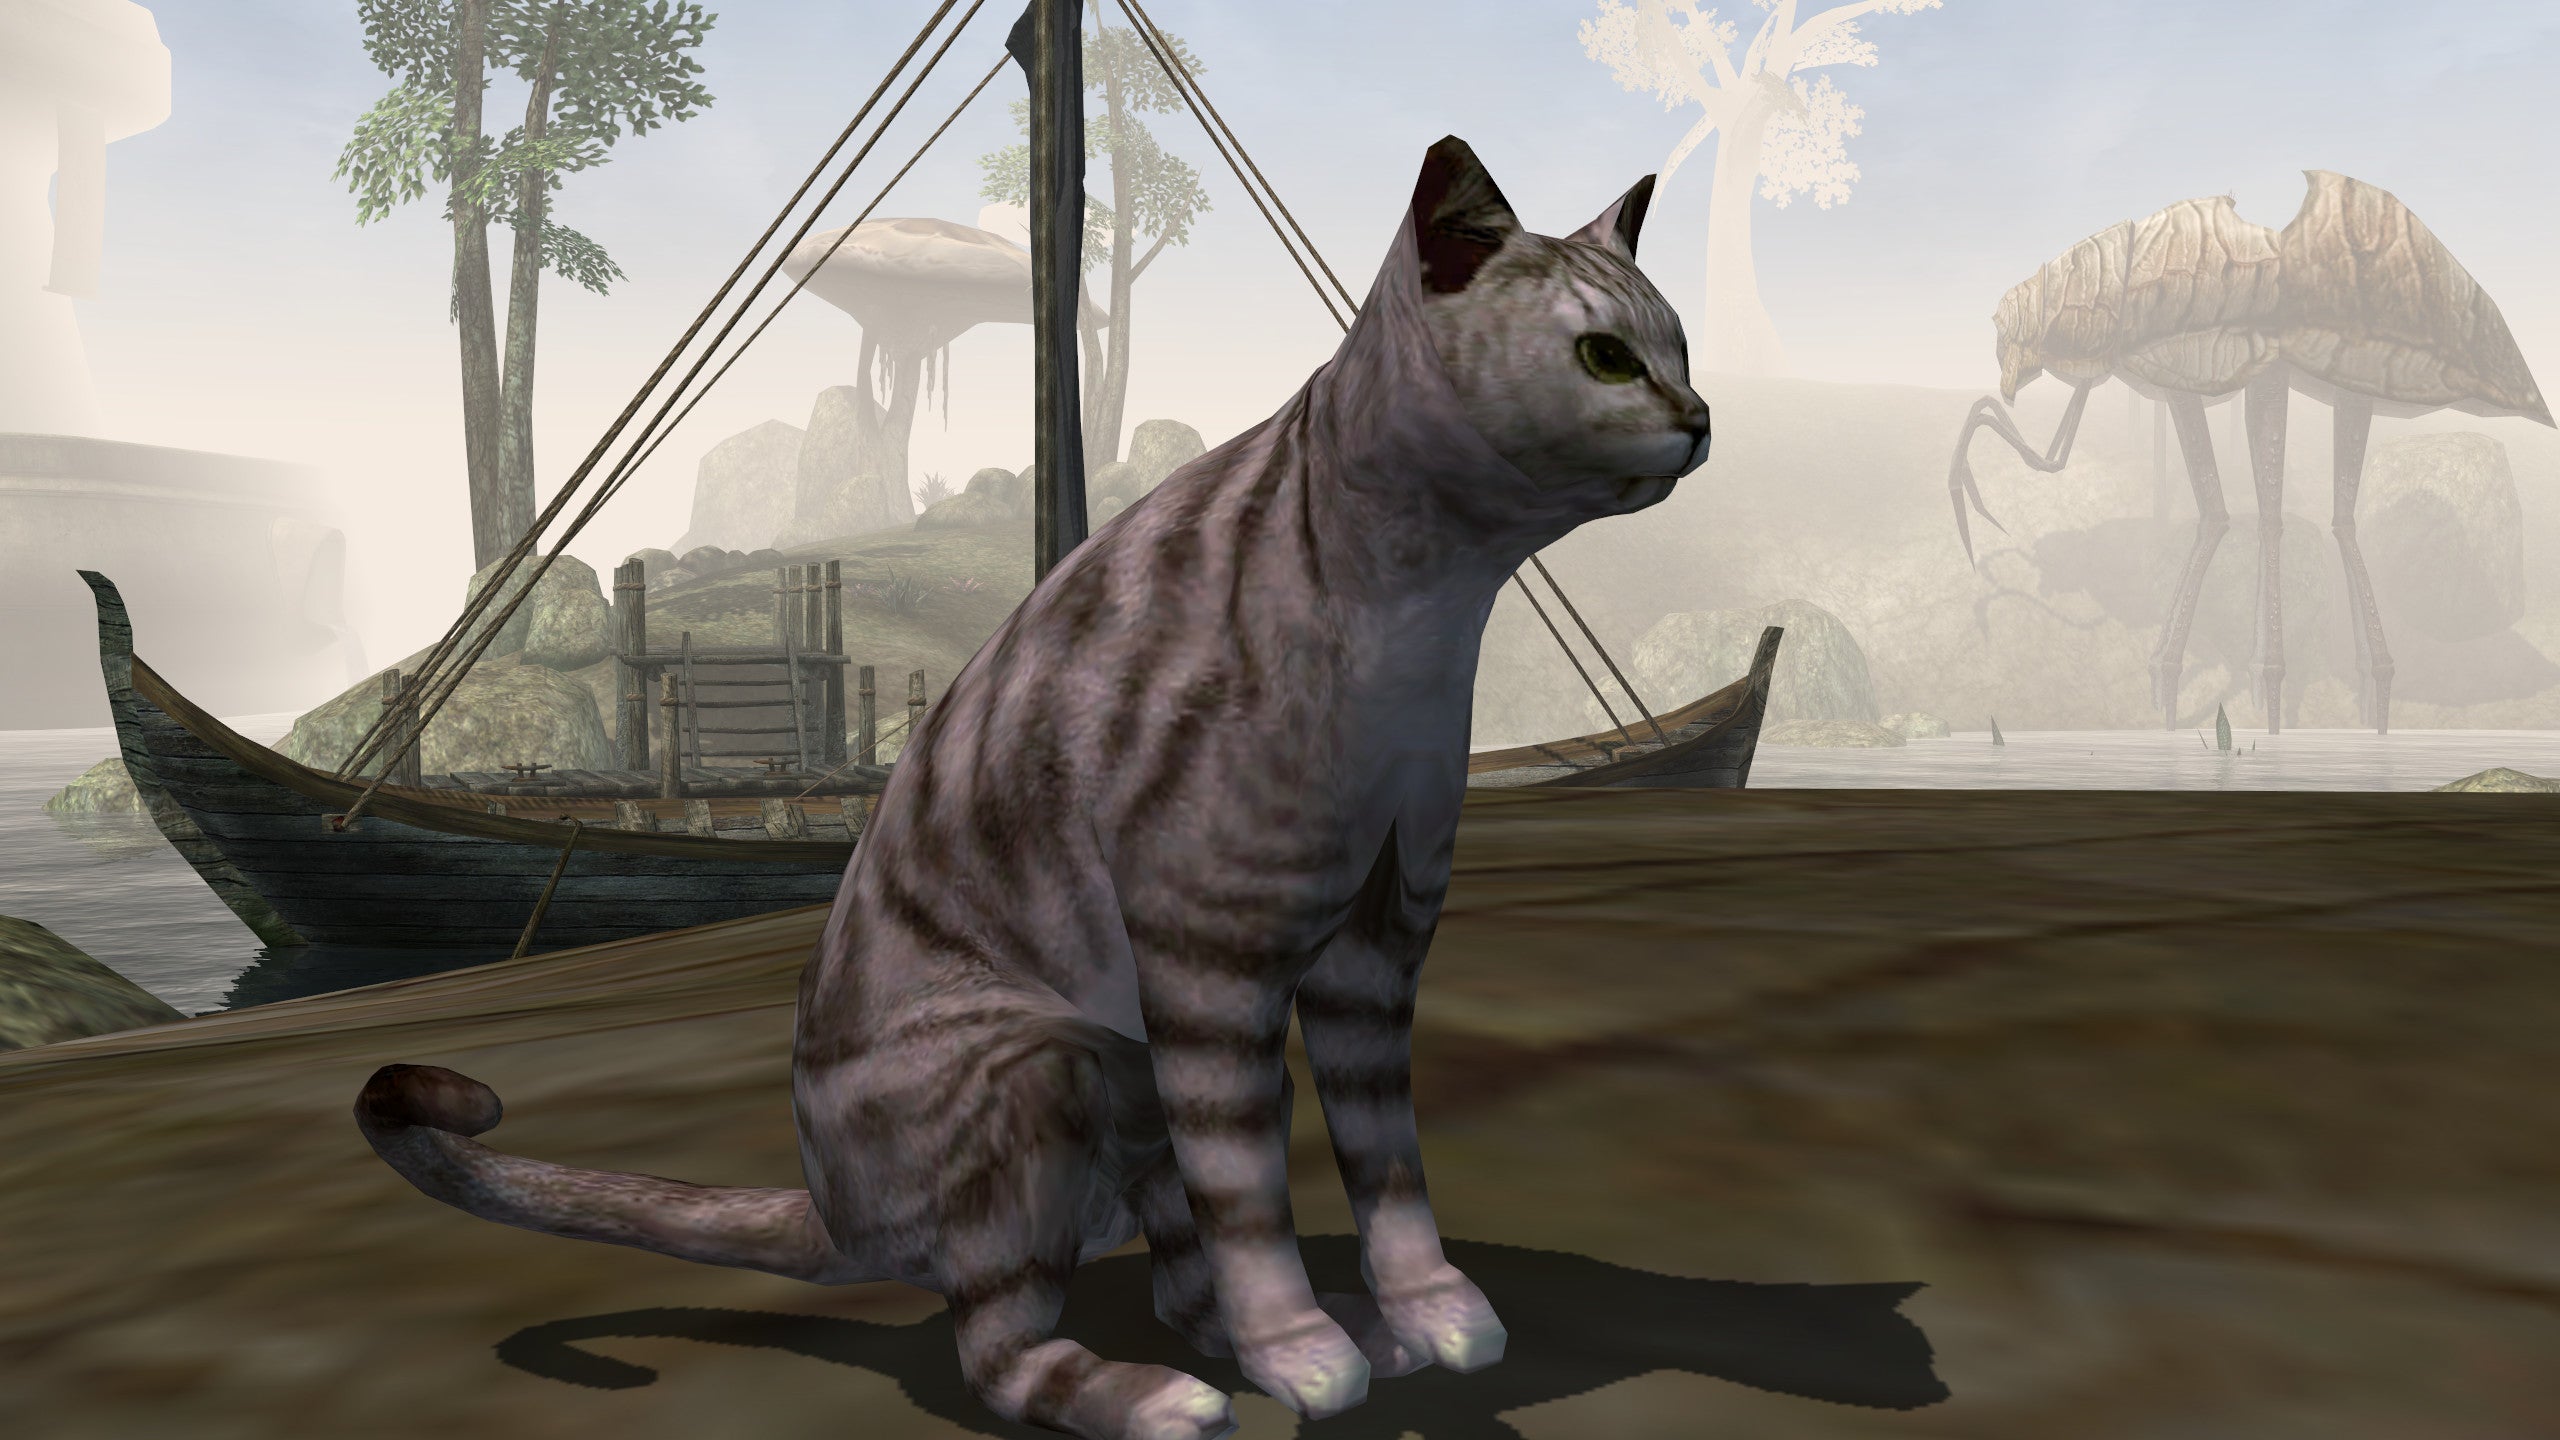 Stripes the cat sits in front of a silt walker in a screenshot from the Morrowind mod.